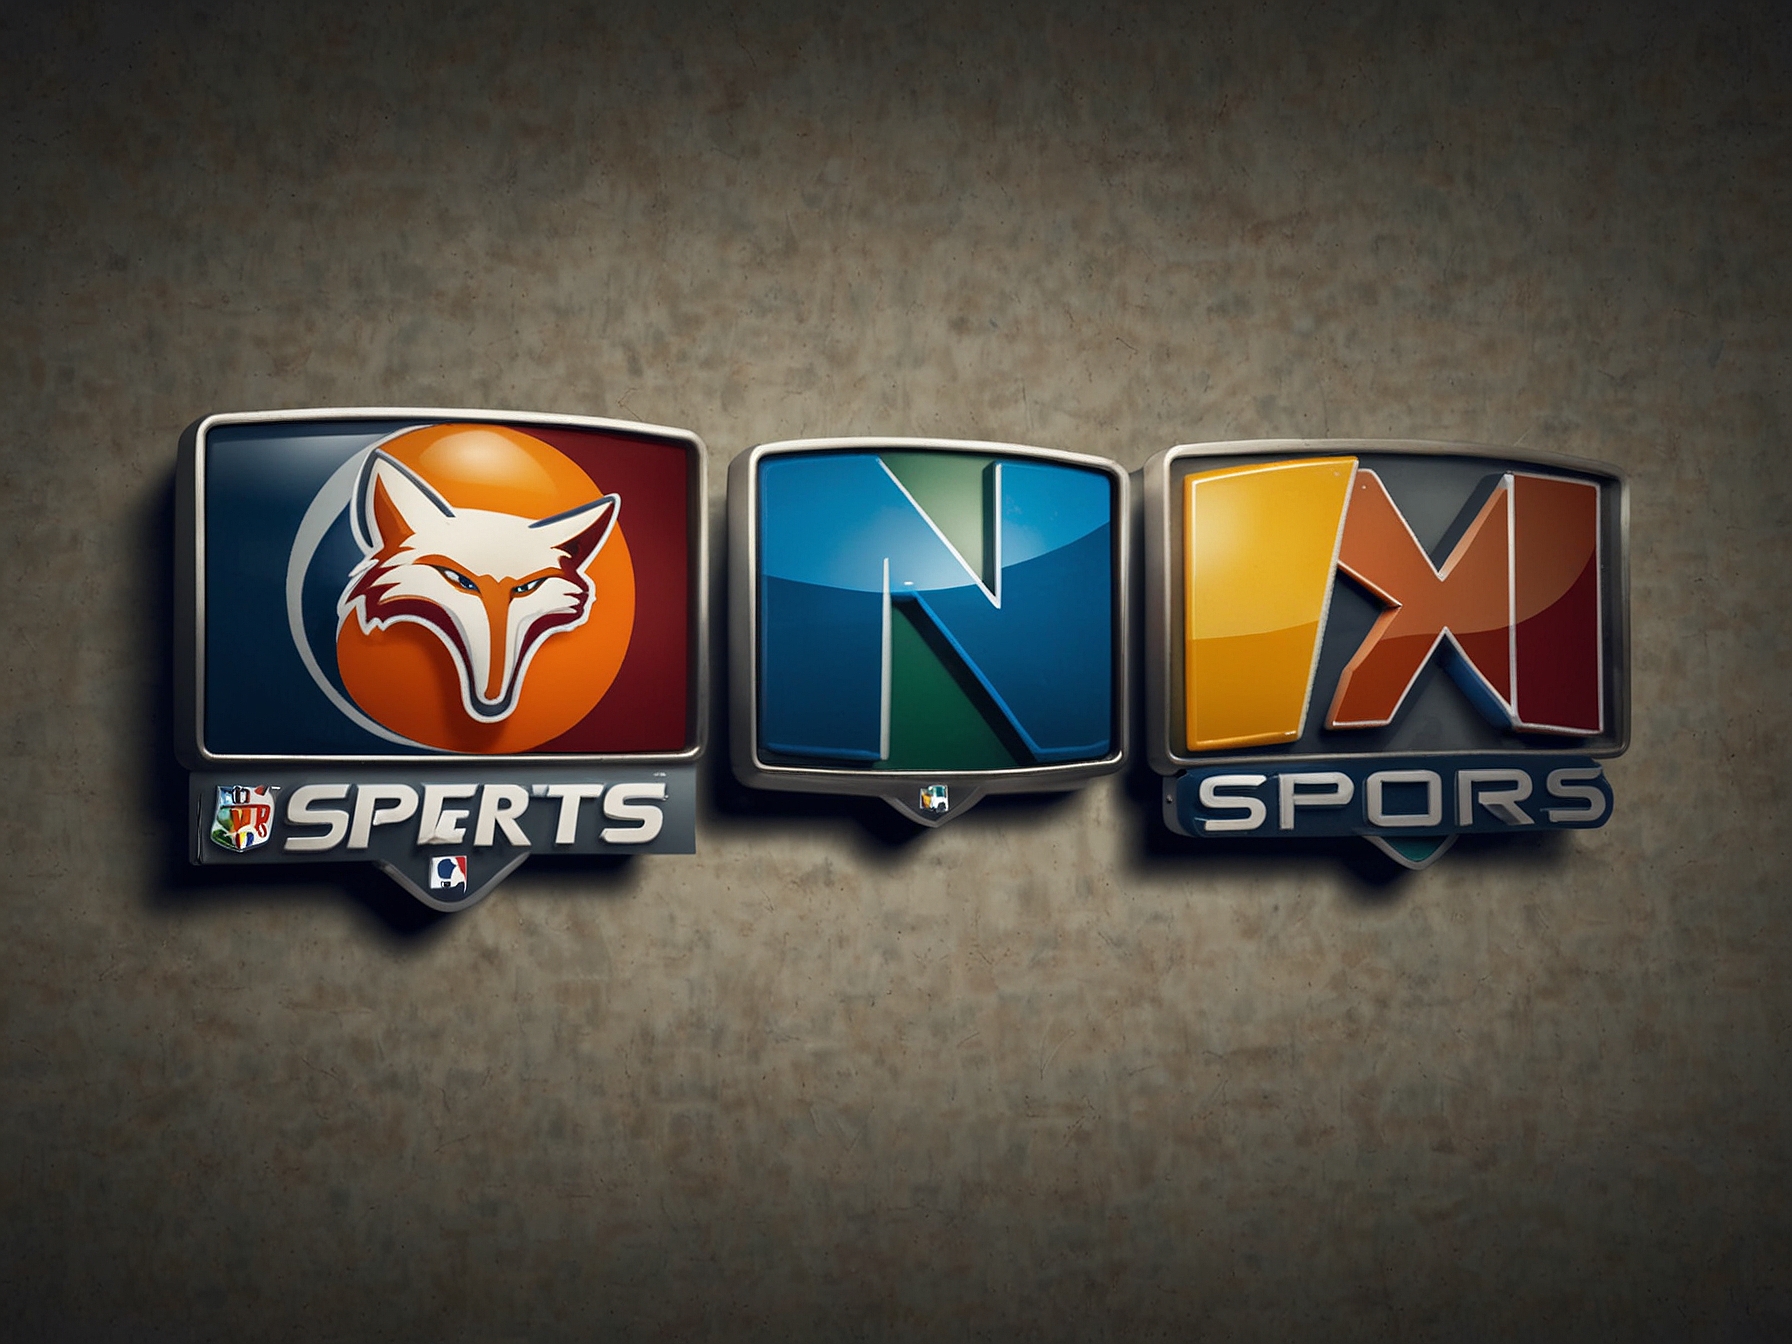 Illustration of logos from Fox Sports, NBC, and TNT, symbolizing their new partnership with the Big East Conference to broadcast various sporting events over the next six years.